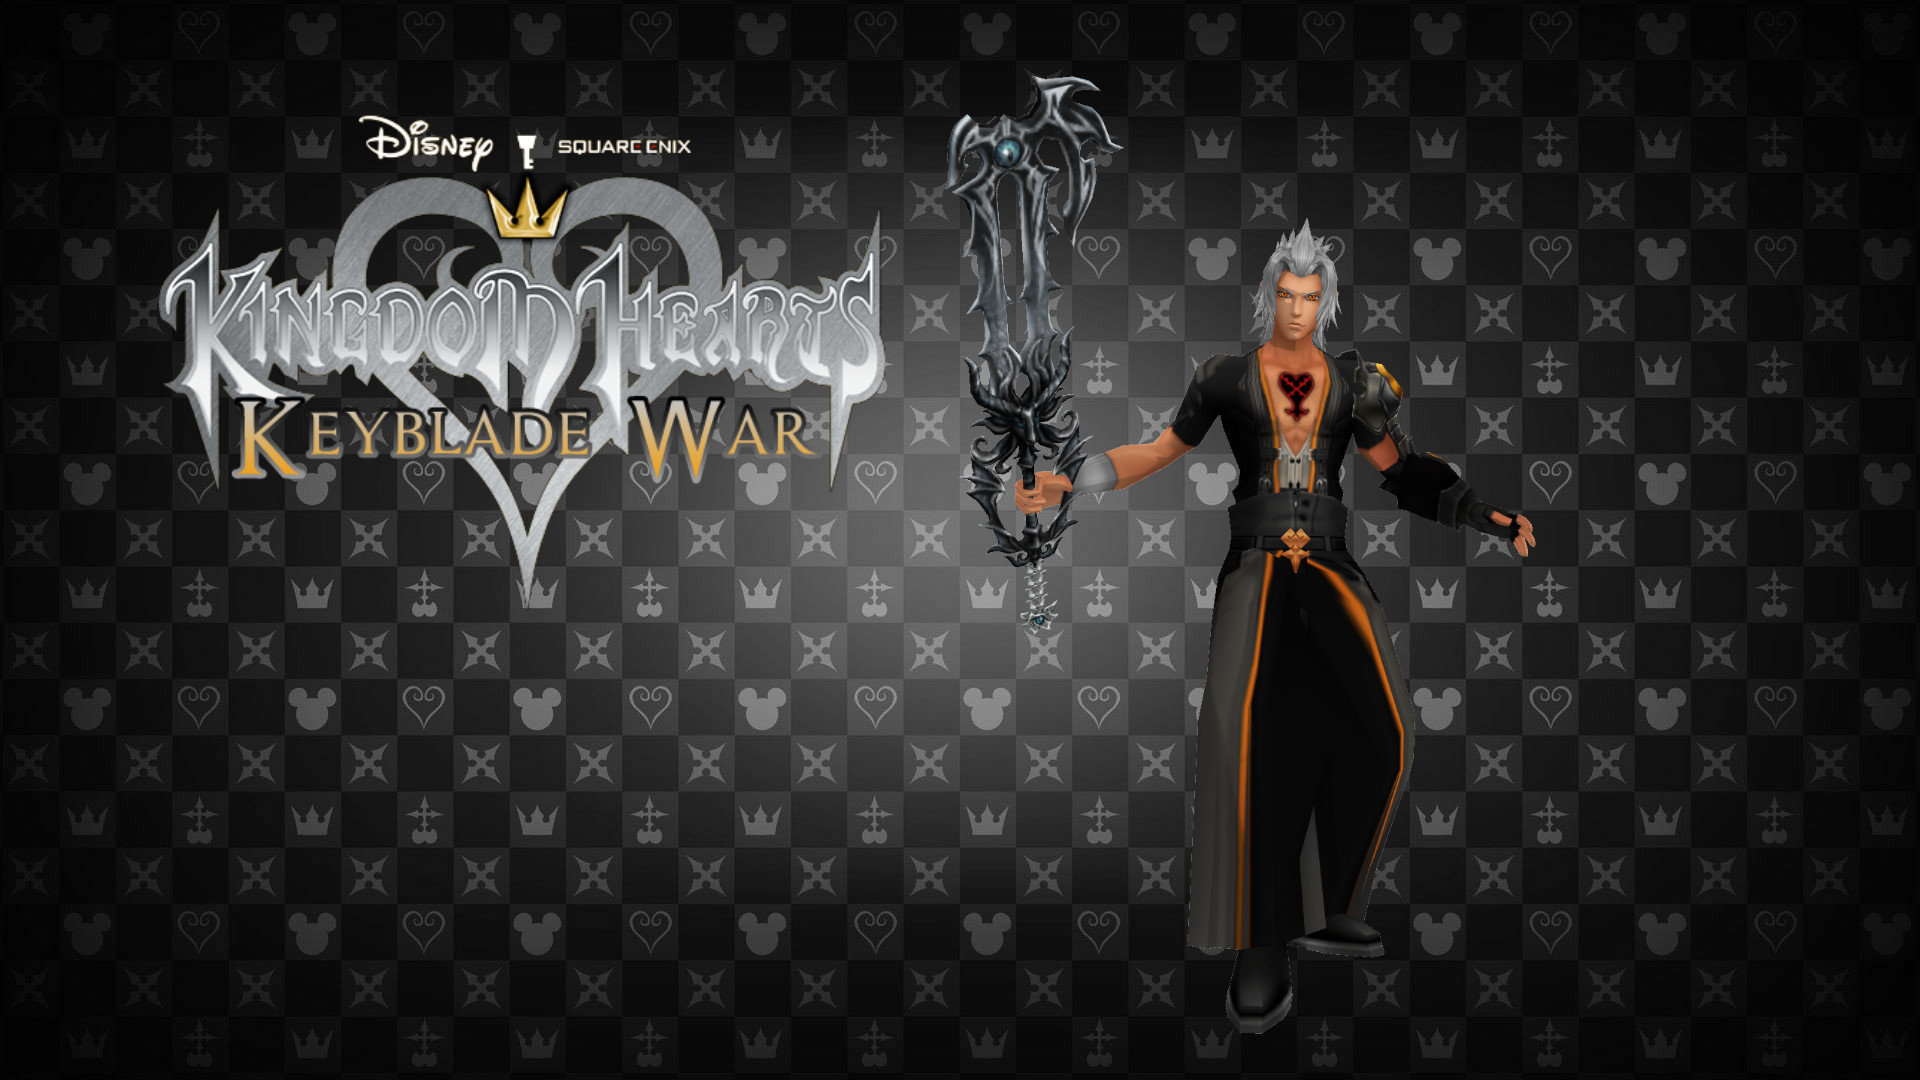 1920x1080 Backgrounds In High Quality: Kingdom Hearts Keyblade by Gabriela Doung - HD  Wallpapers